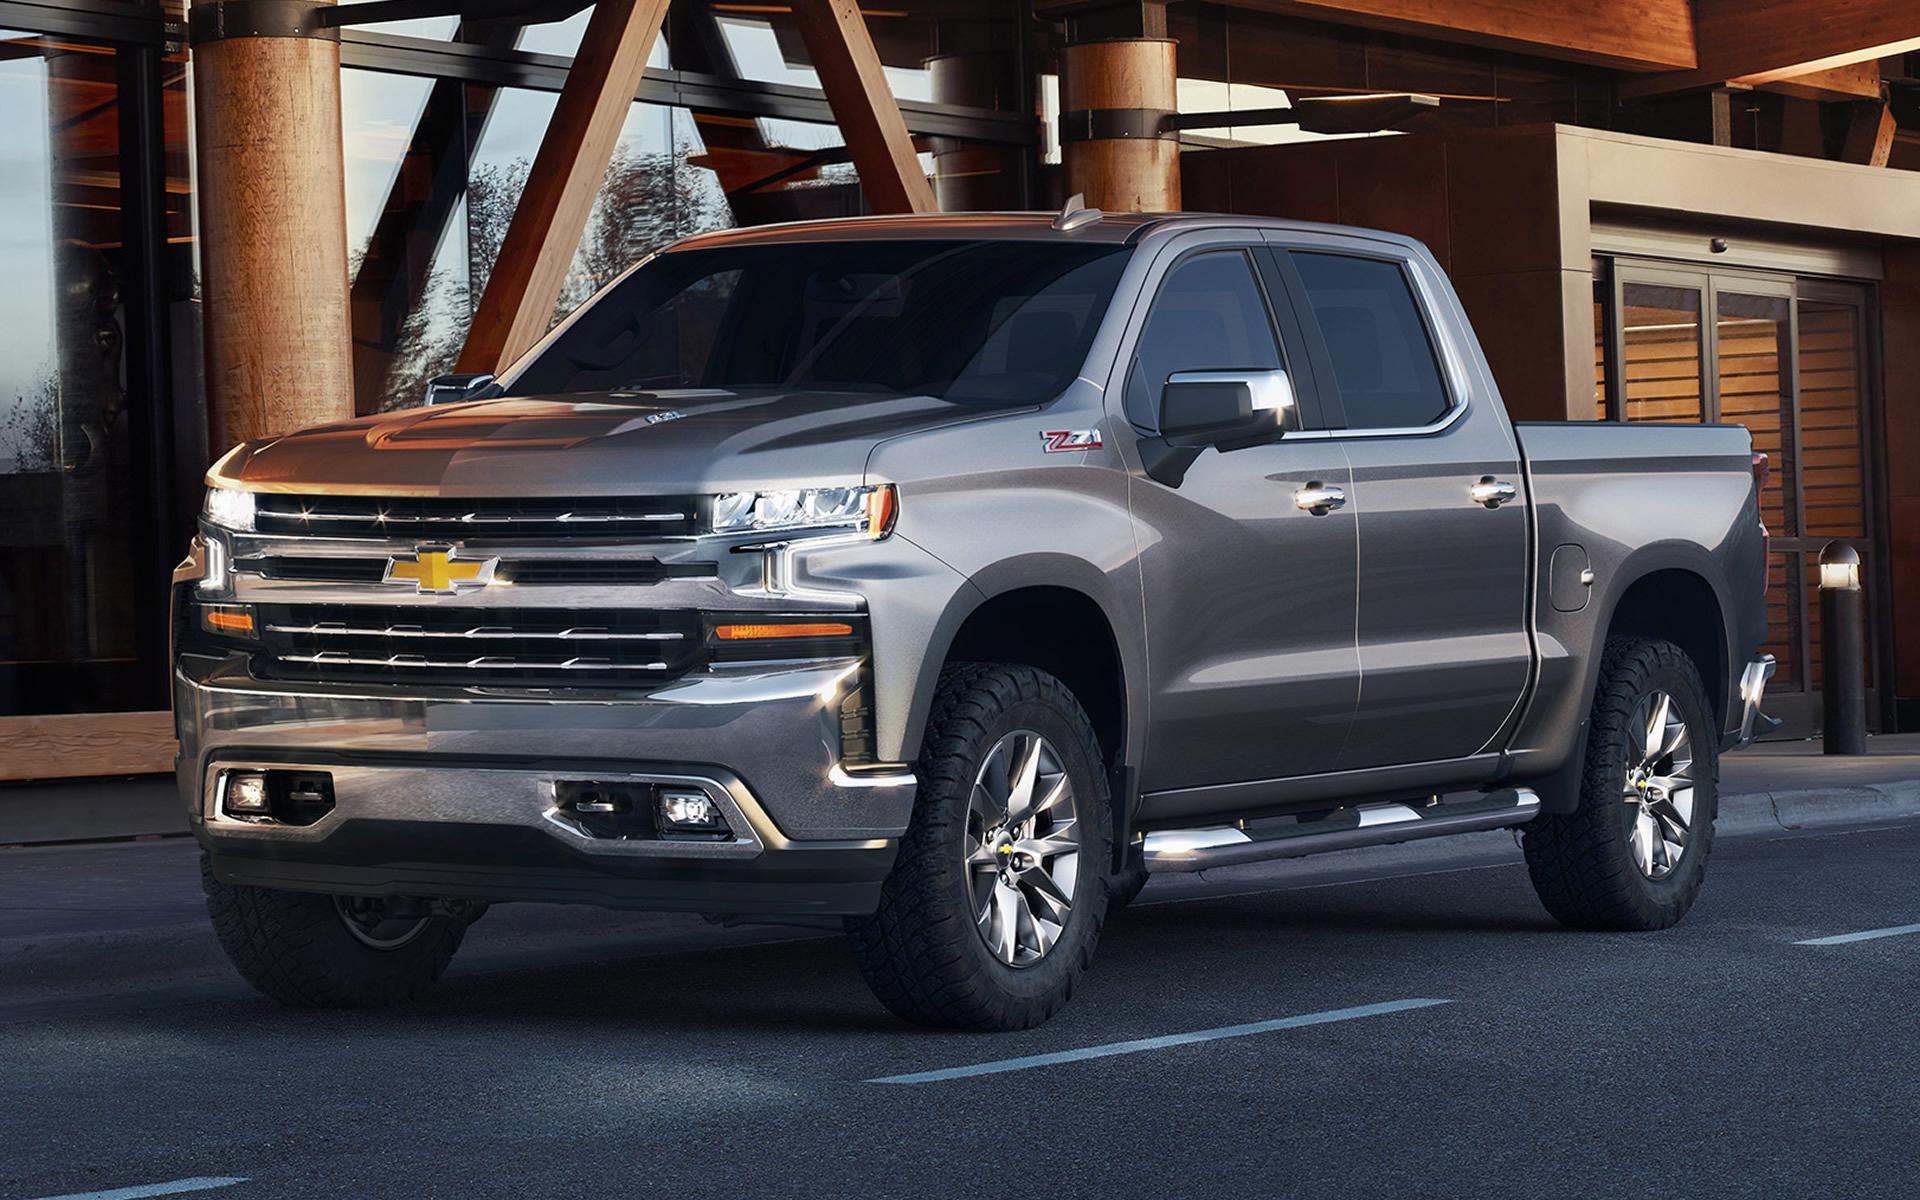 Chevy Truck. Top Car Release 2020